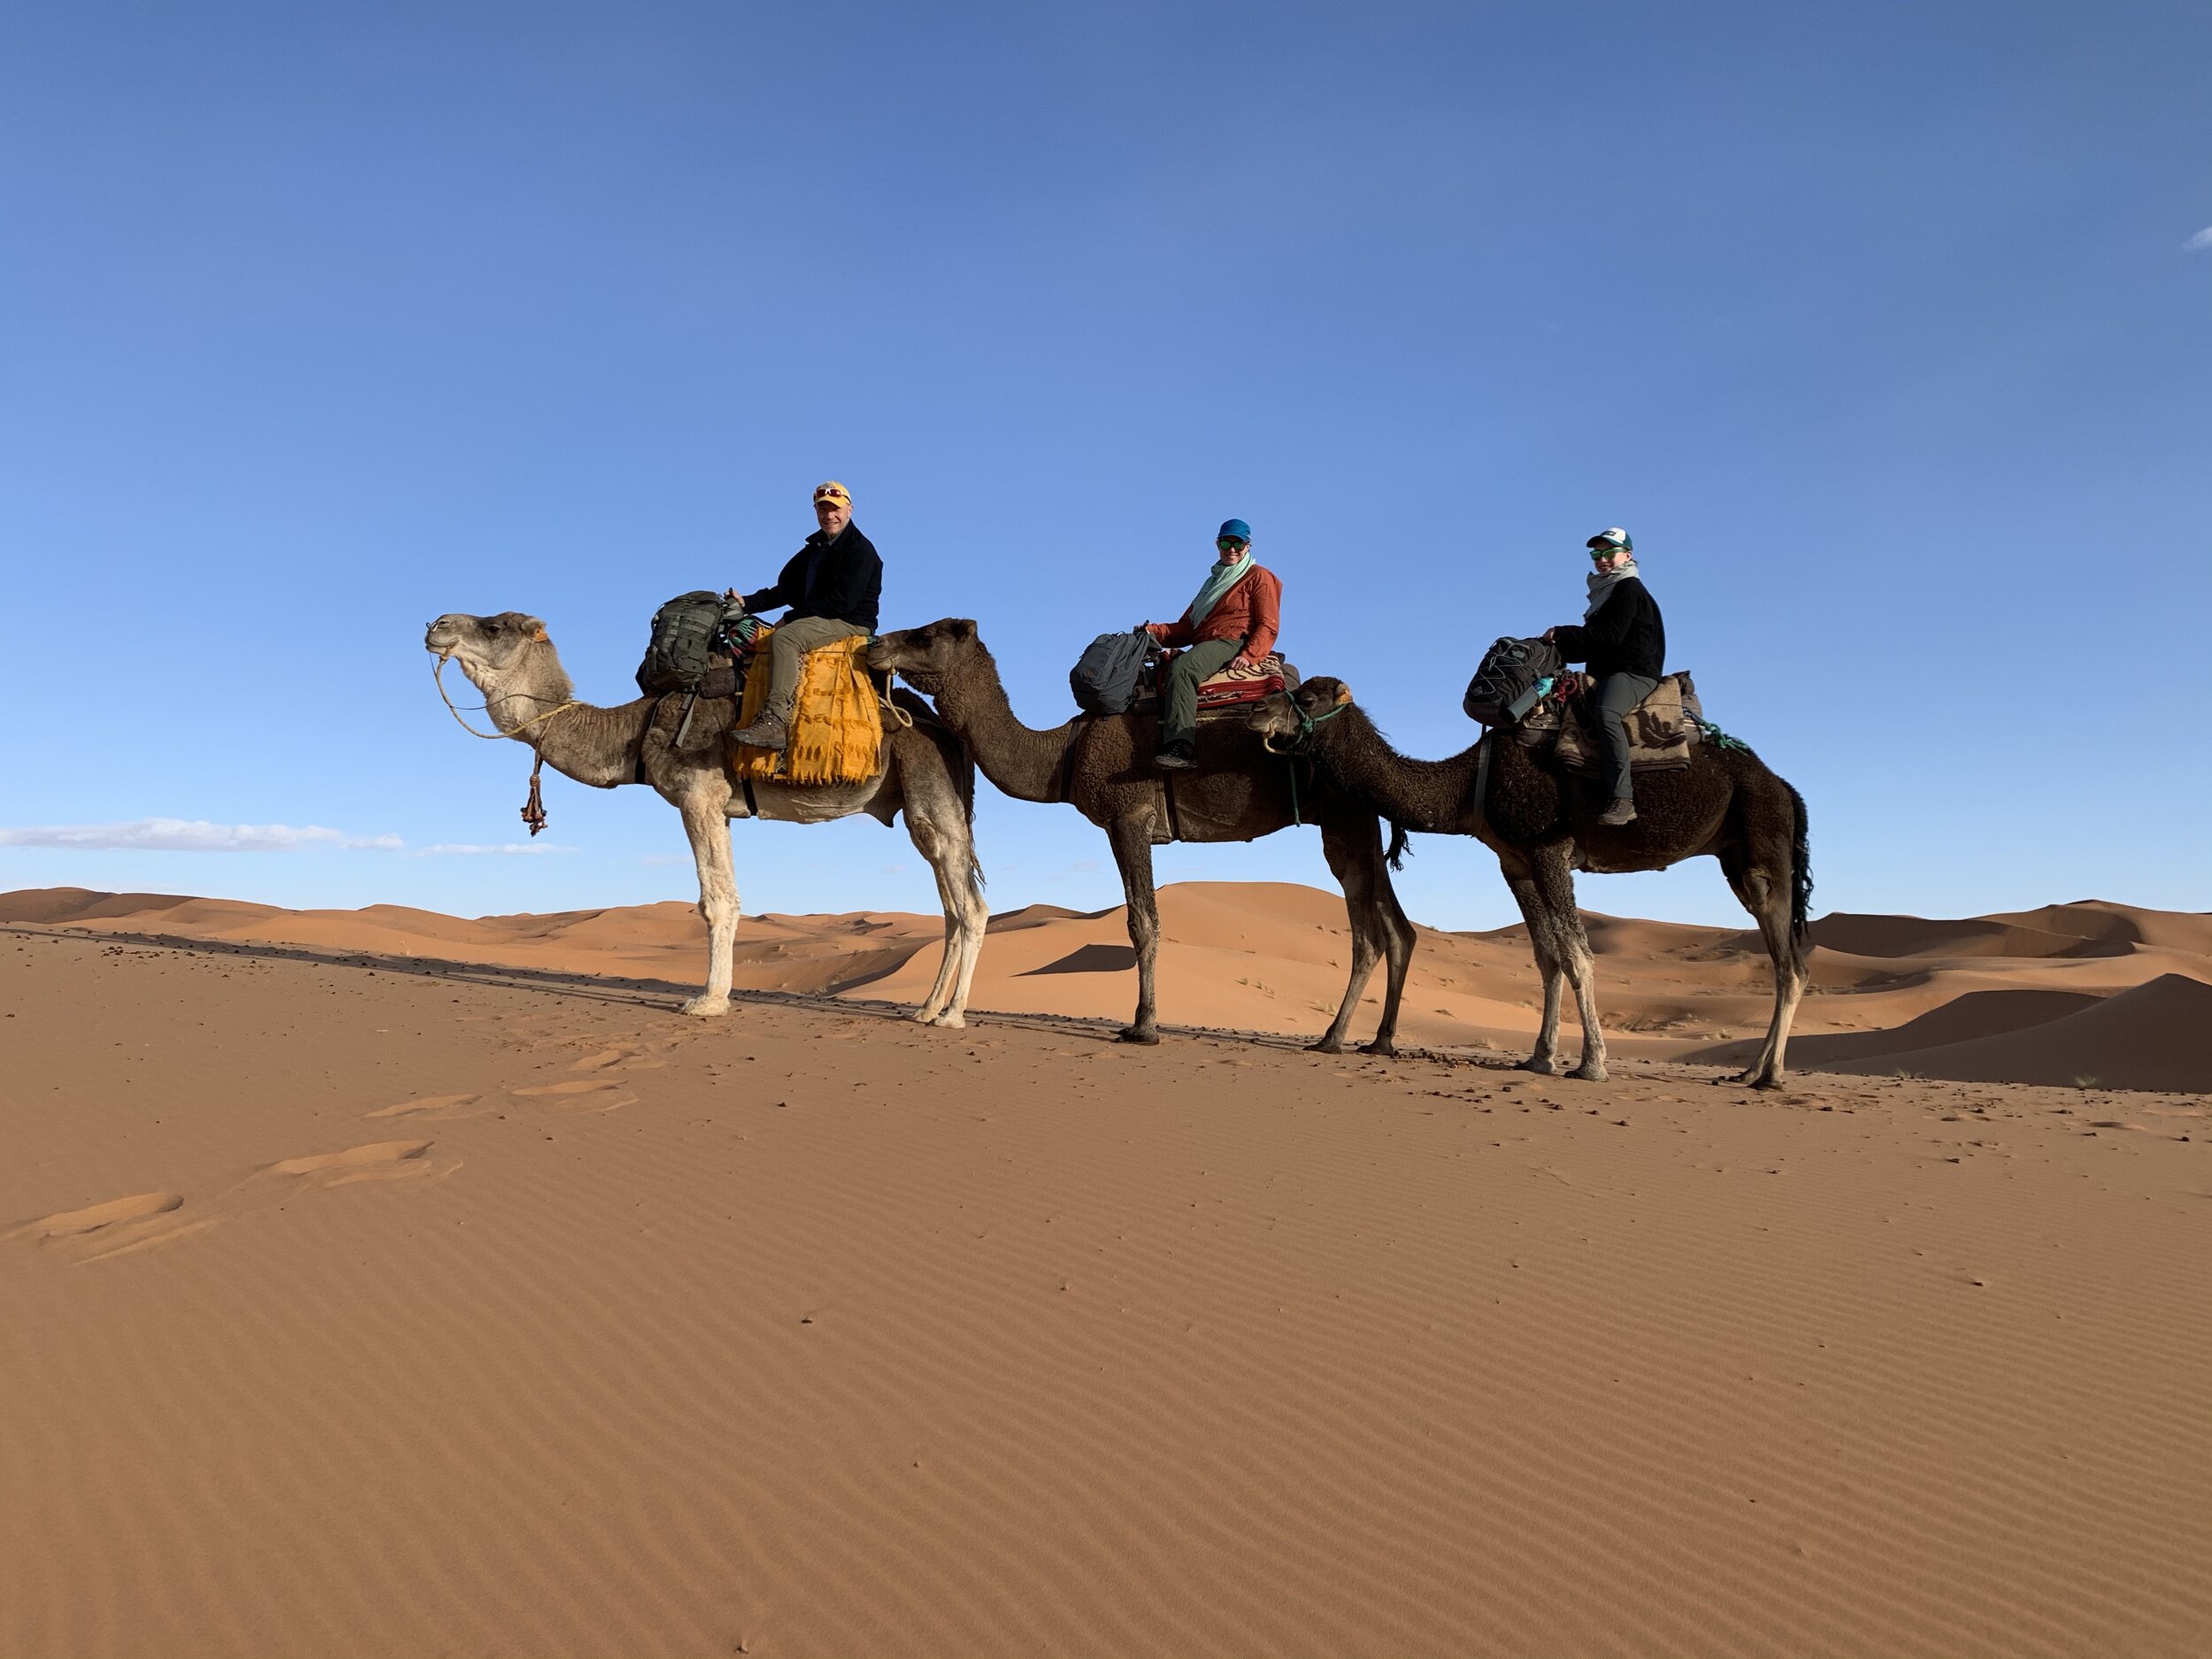 Family portrait with camels #1.jpg